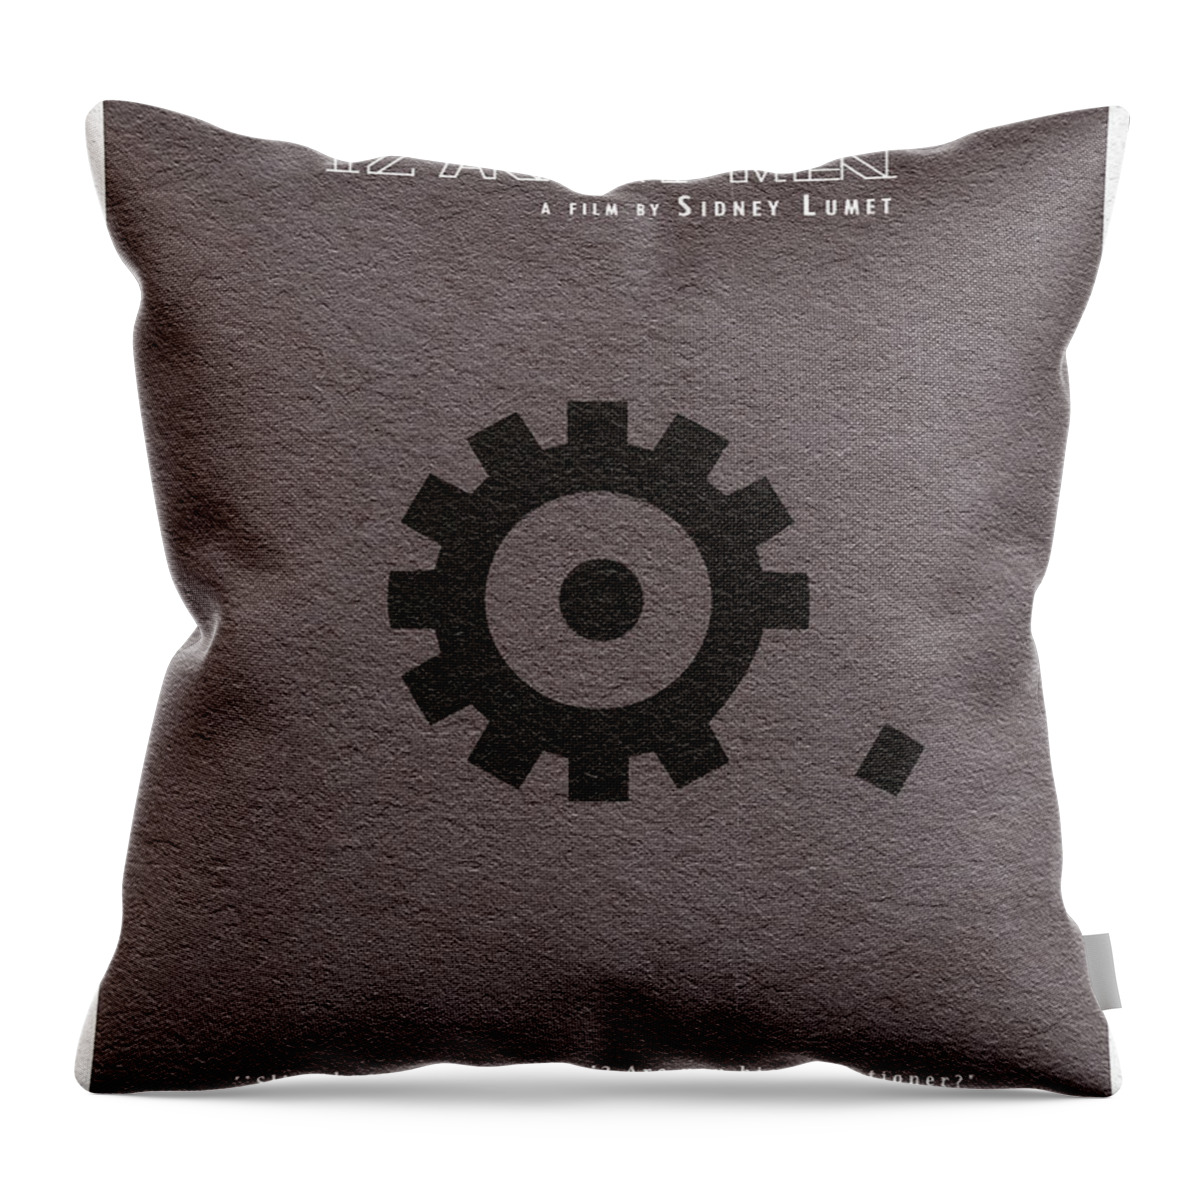 12 Angry Men Throw Pillow featuring the digital art 12 Angry Men #2 by Inspirowl Design